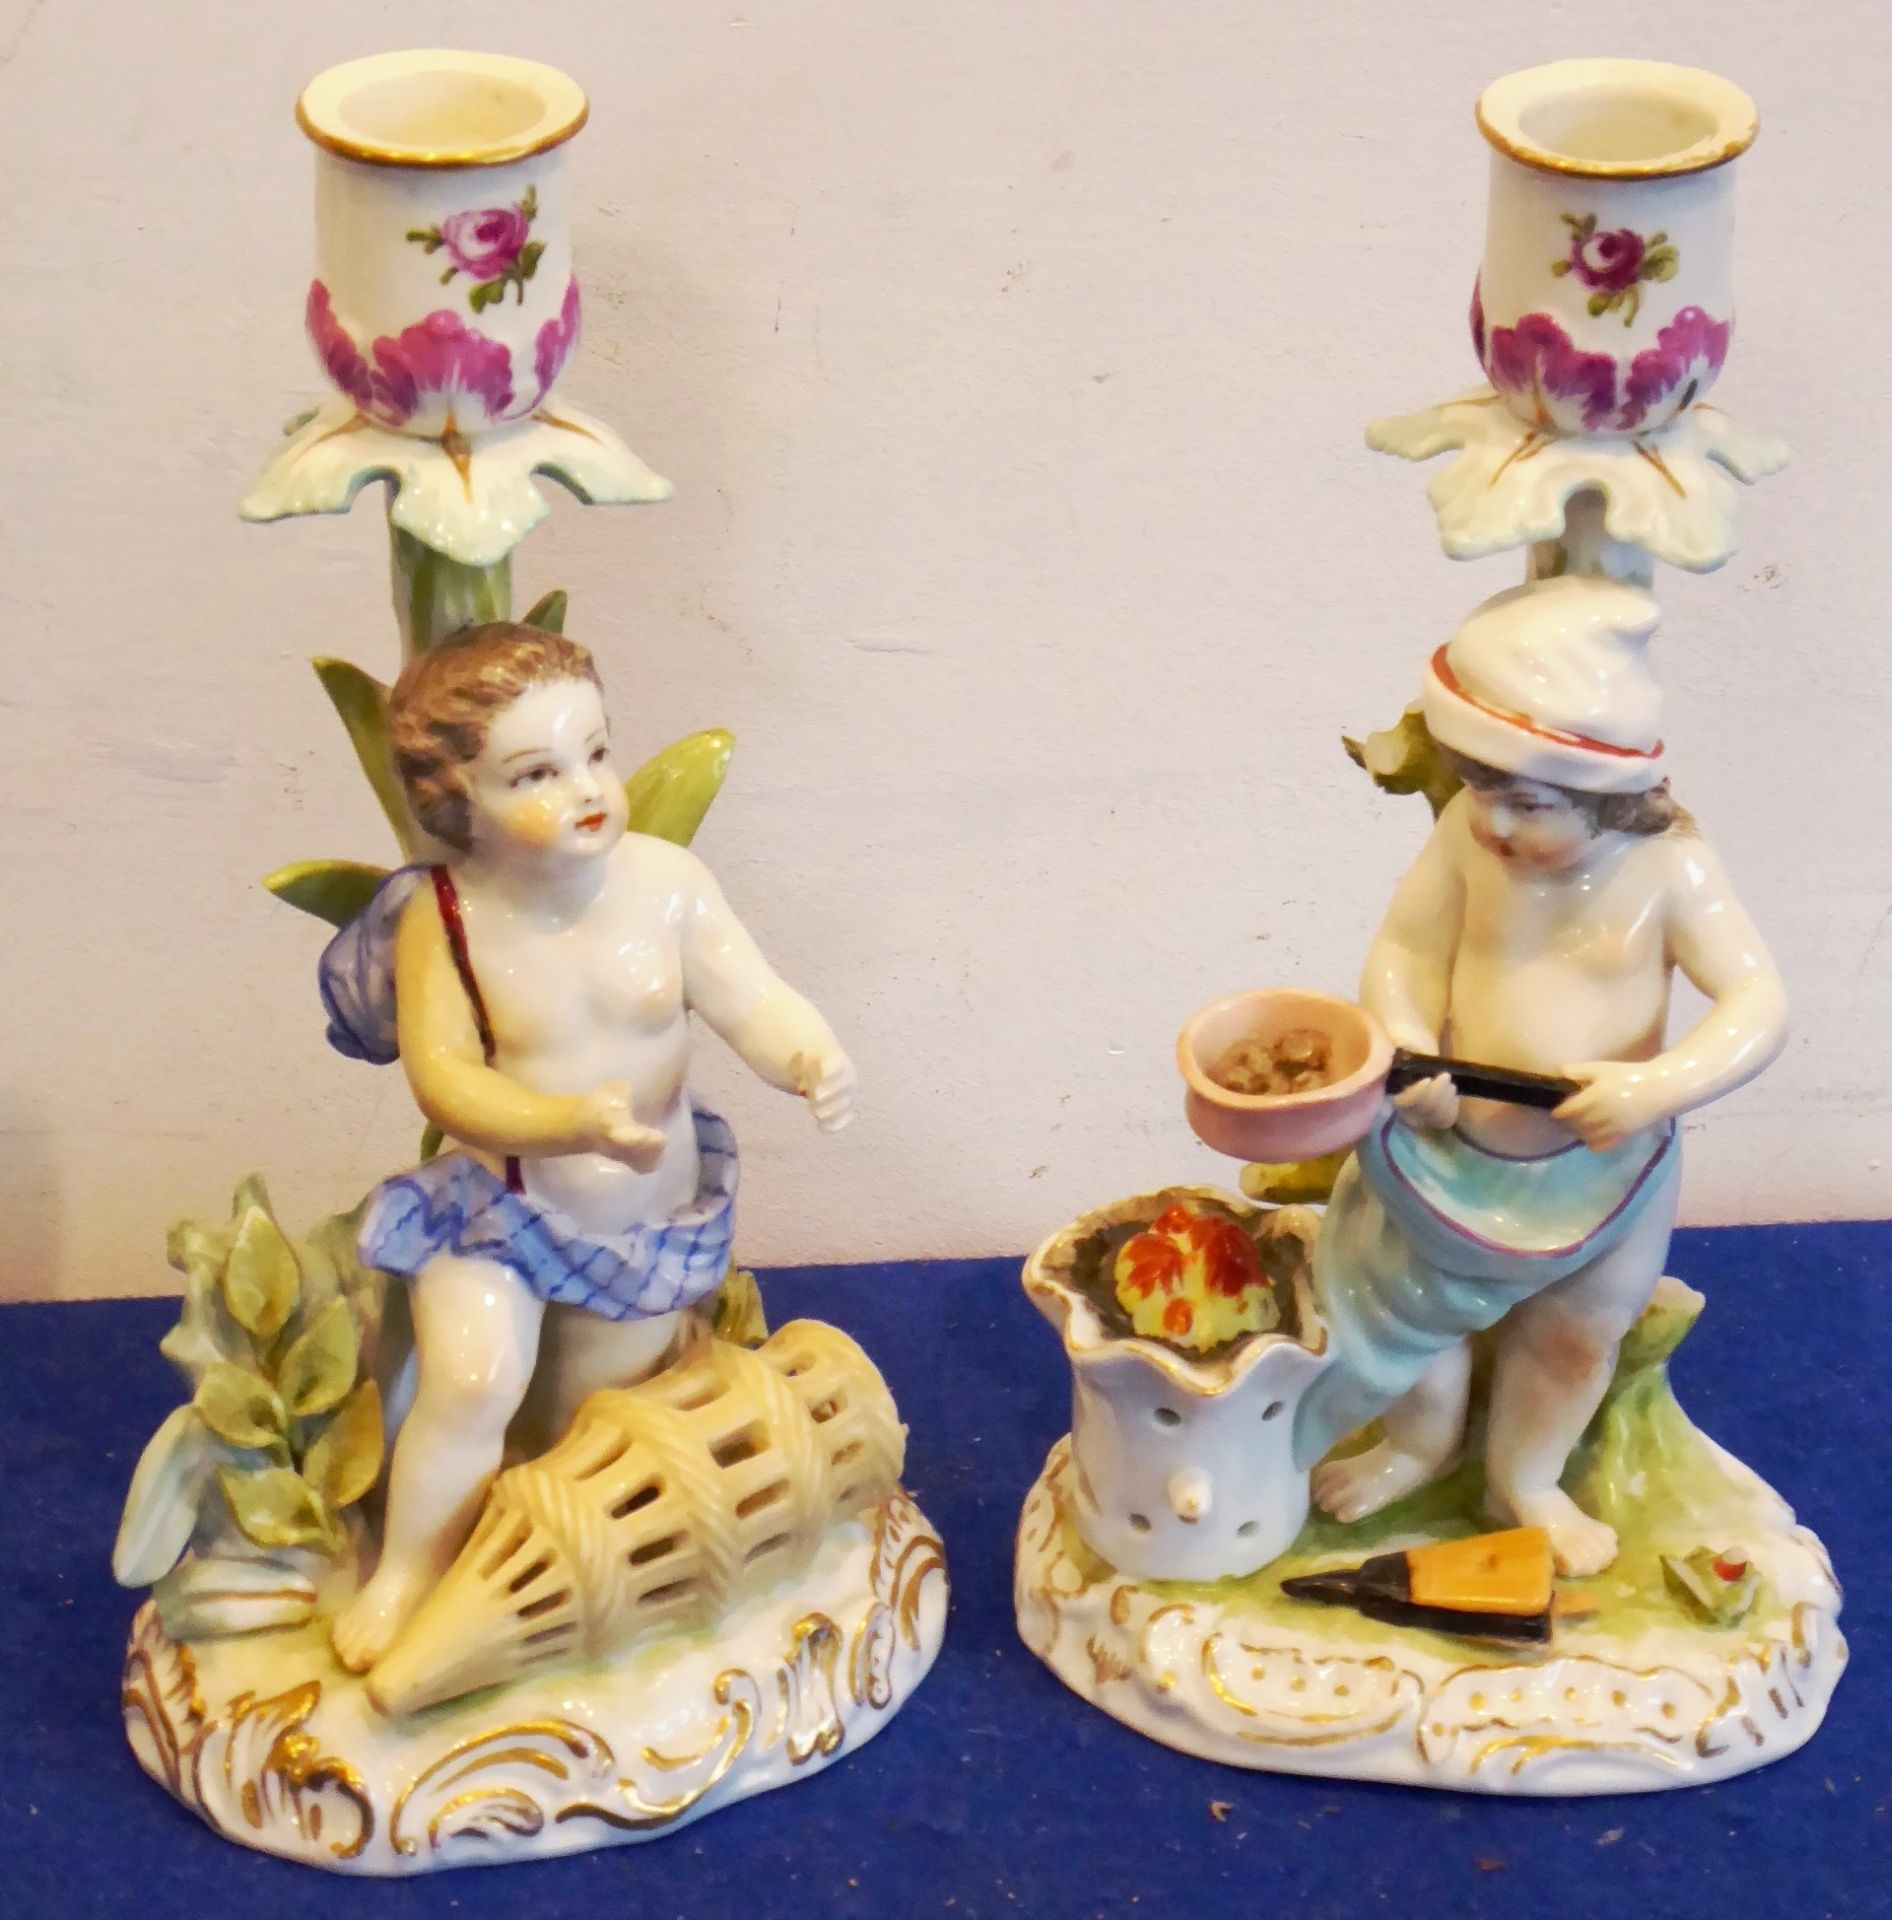 A pair of late-19th / early-20th century German figural porcelain candlesticks modelled as